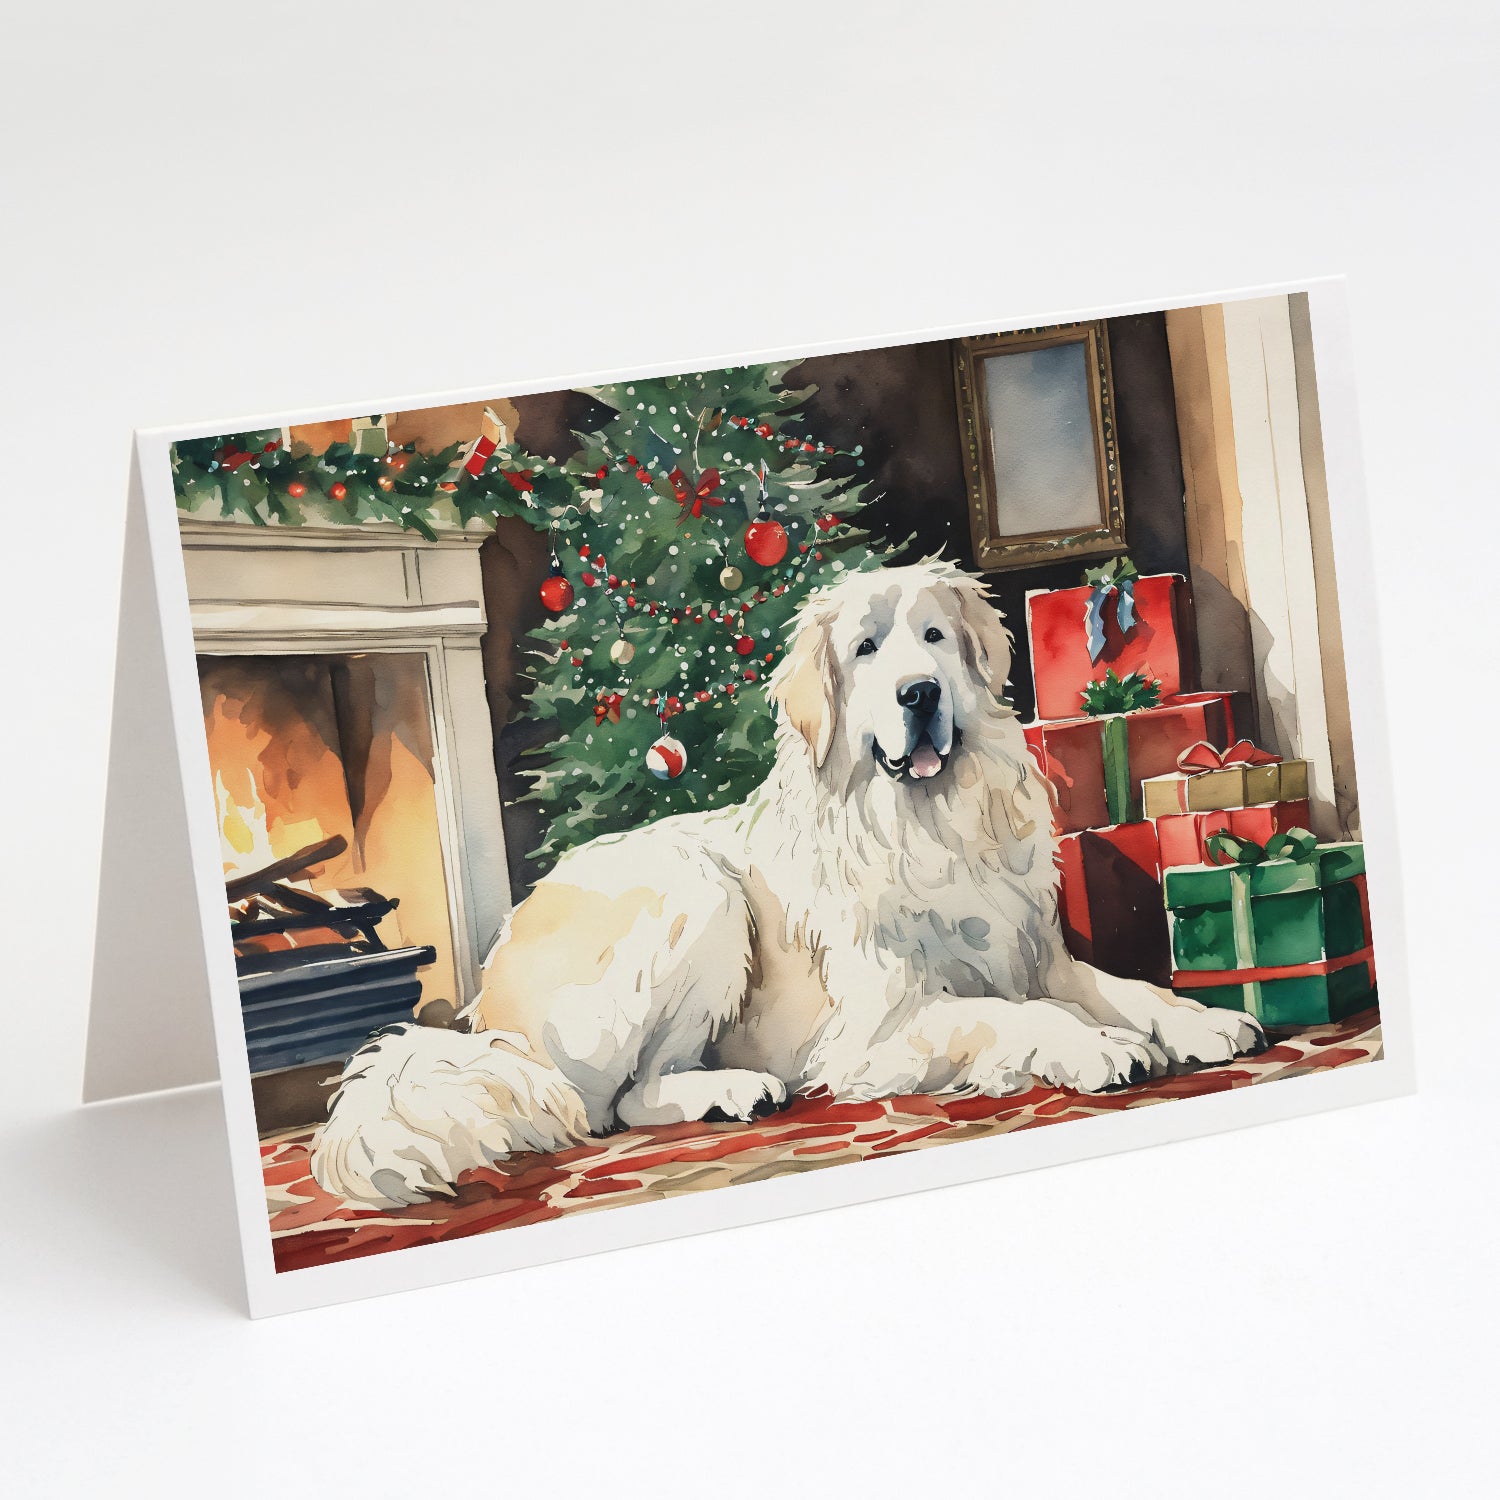 Buy this Great Pyrenees Cozy Christmas Greeting Cards Pack of 8